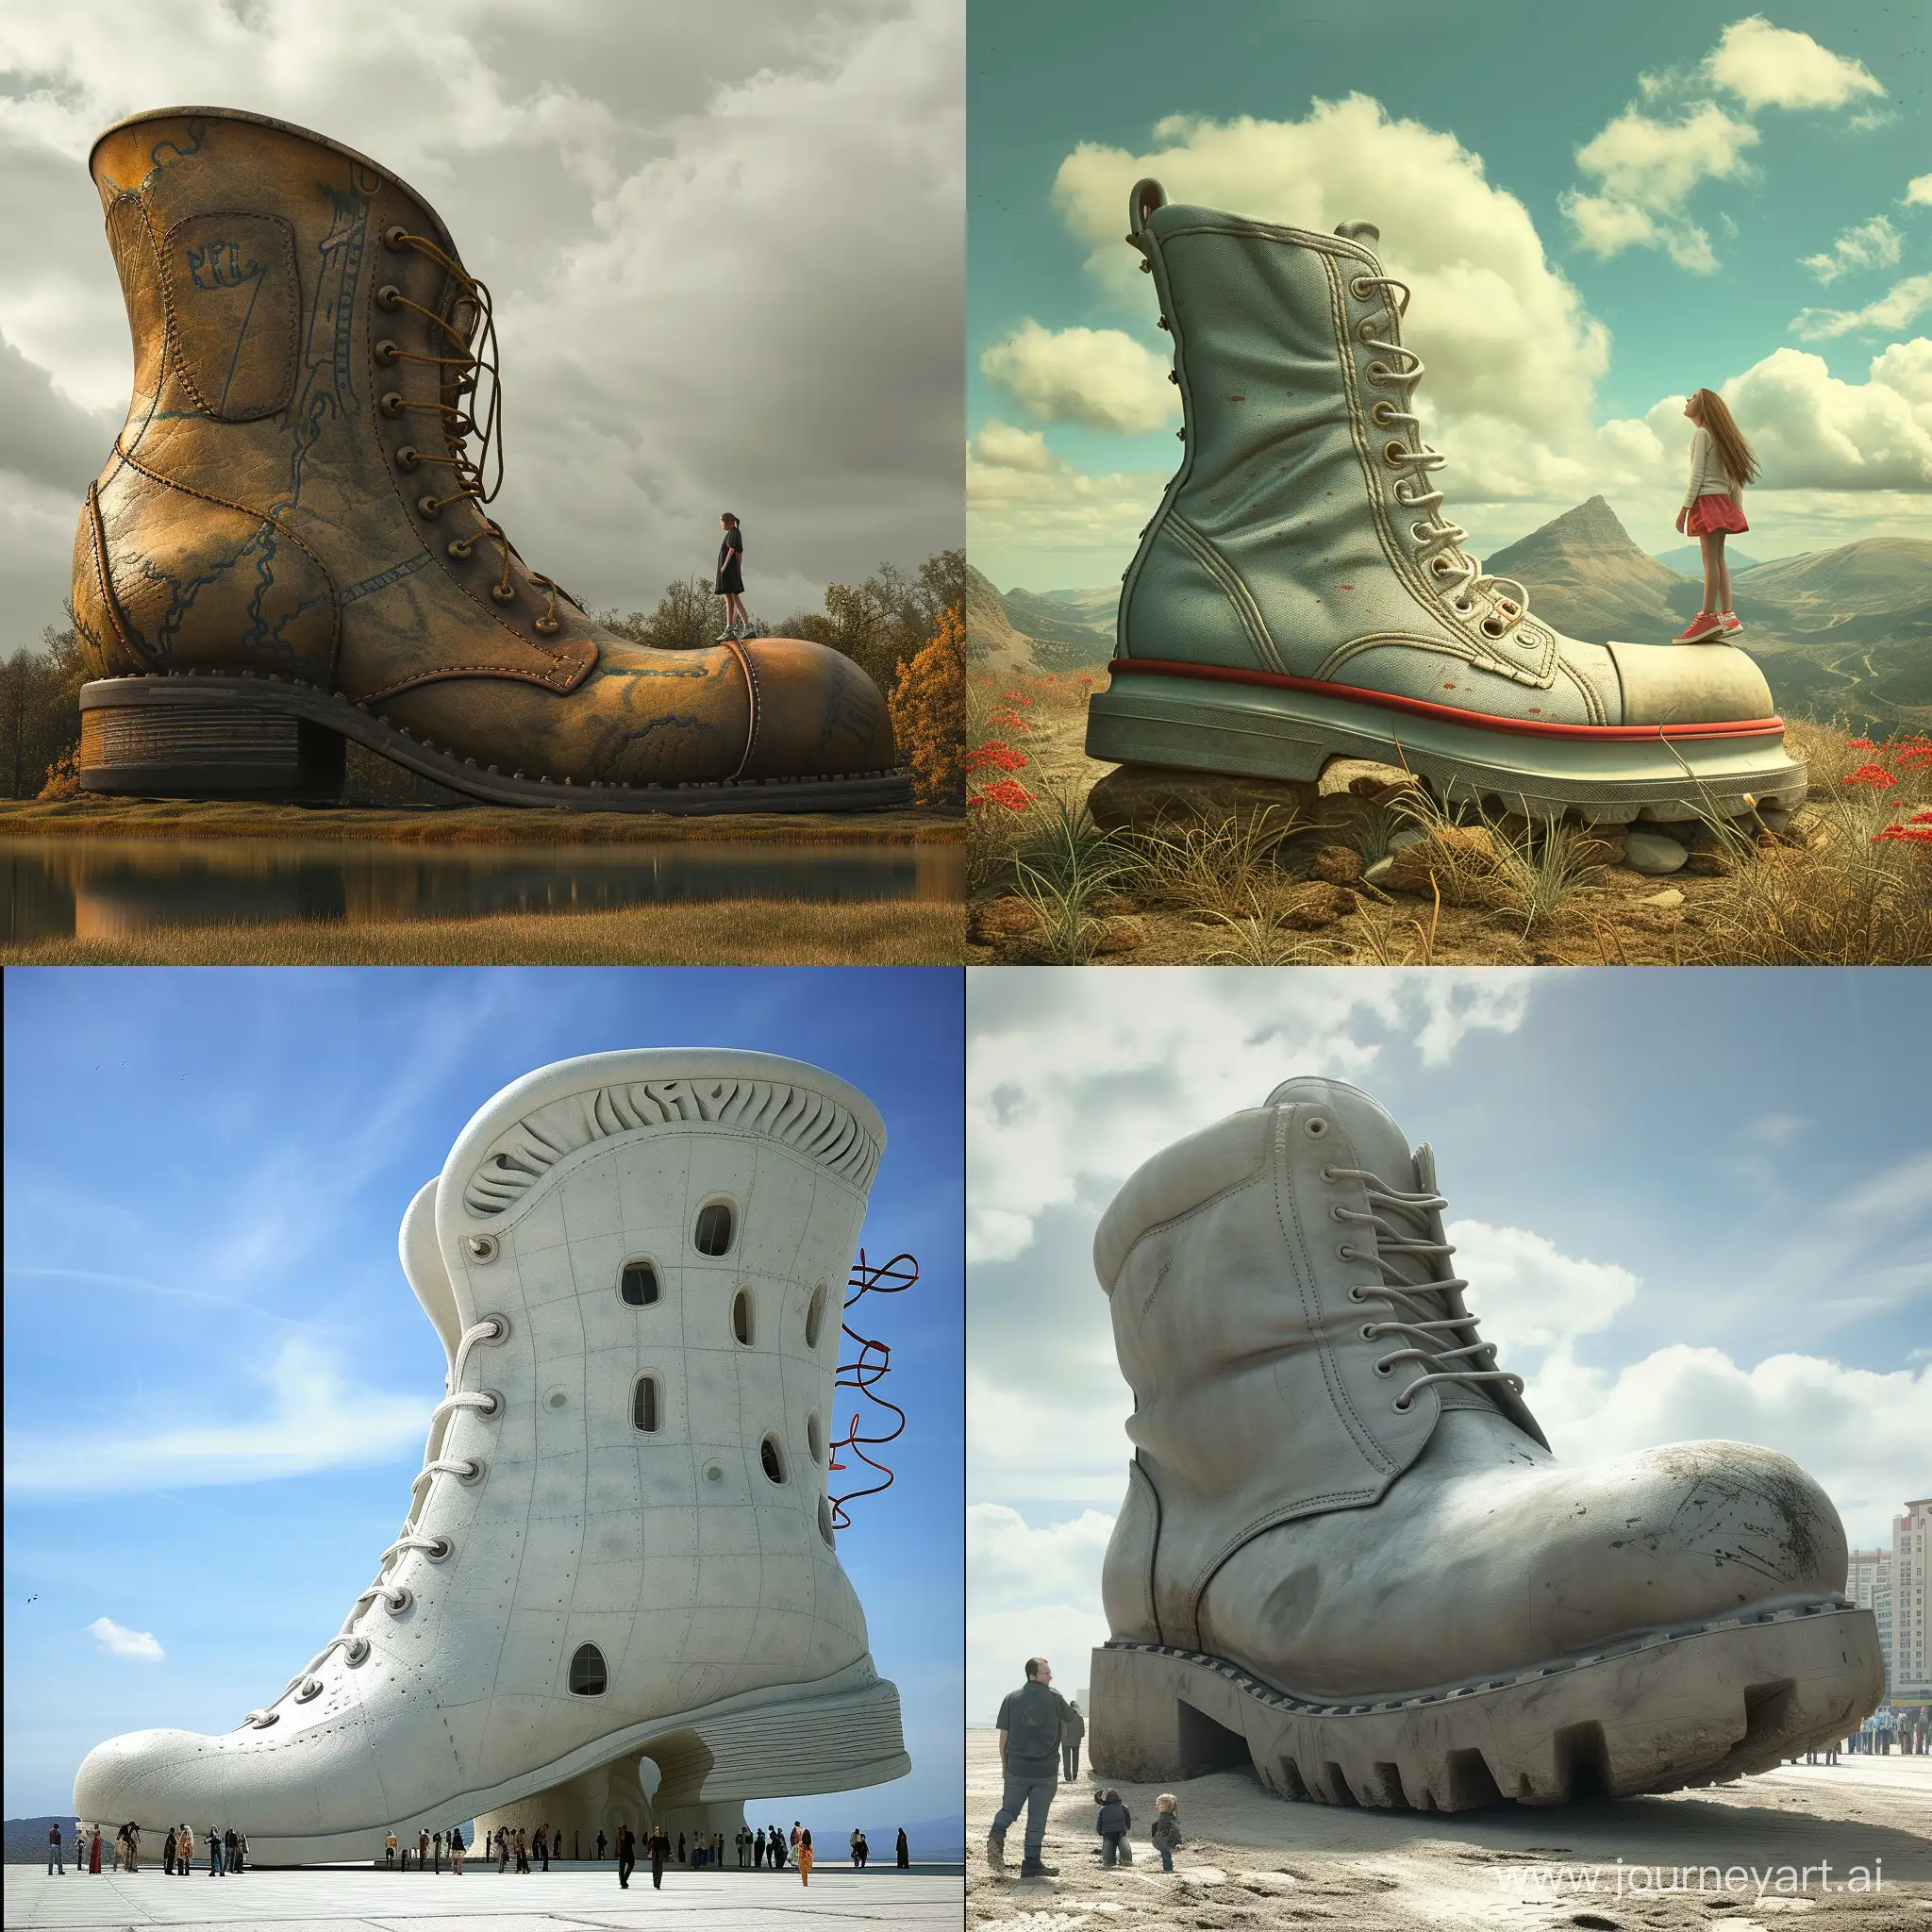 Giant-Shoe-Sculpture-Whimsical-Art-Installation-in-Urban-Setting